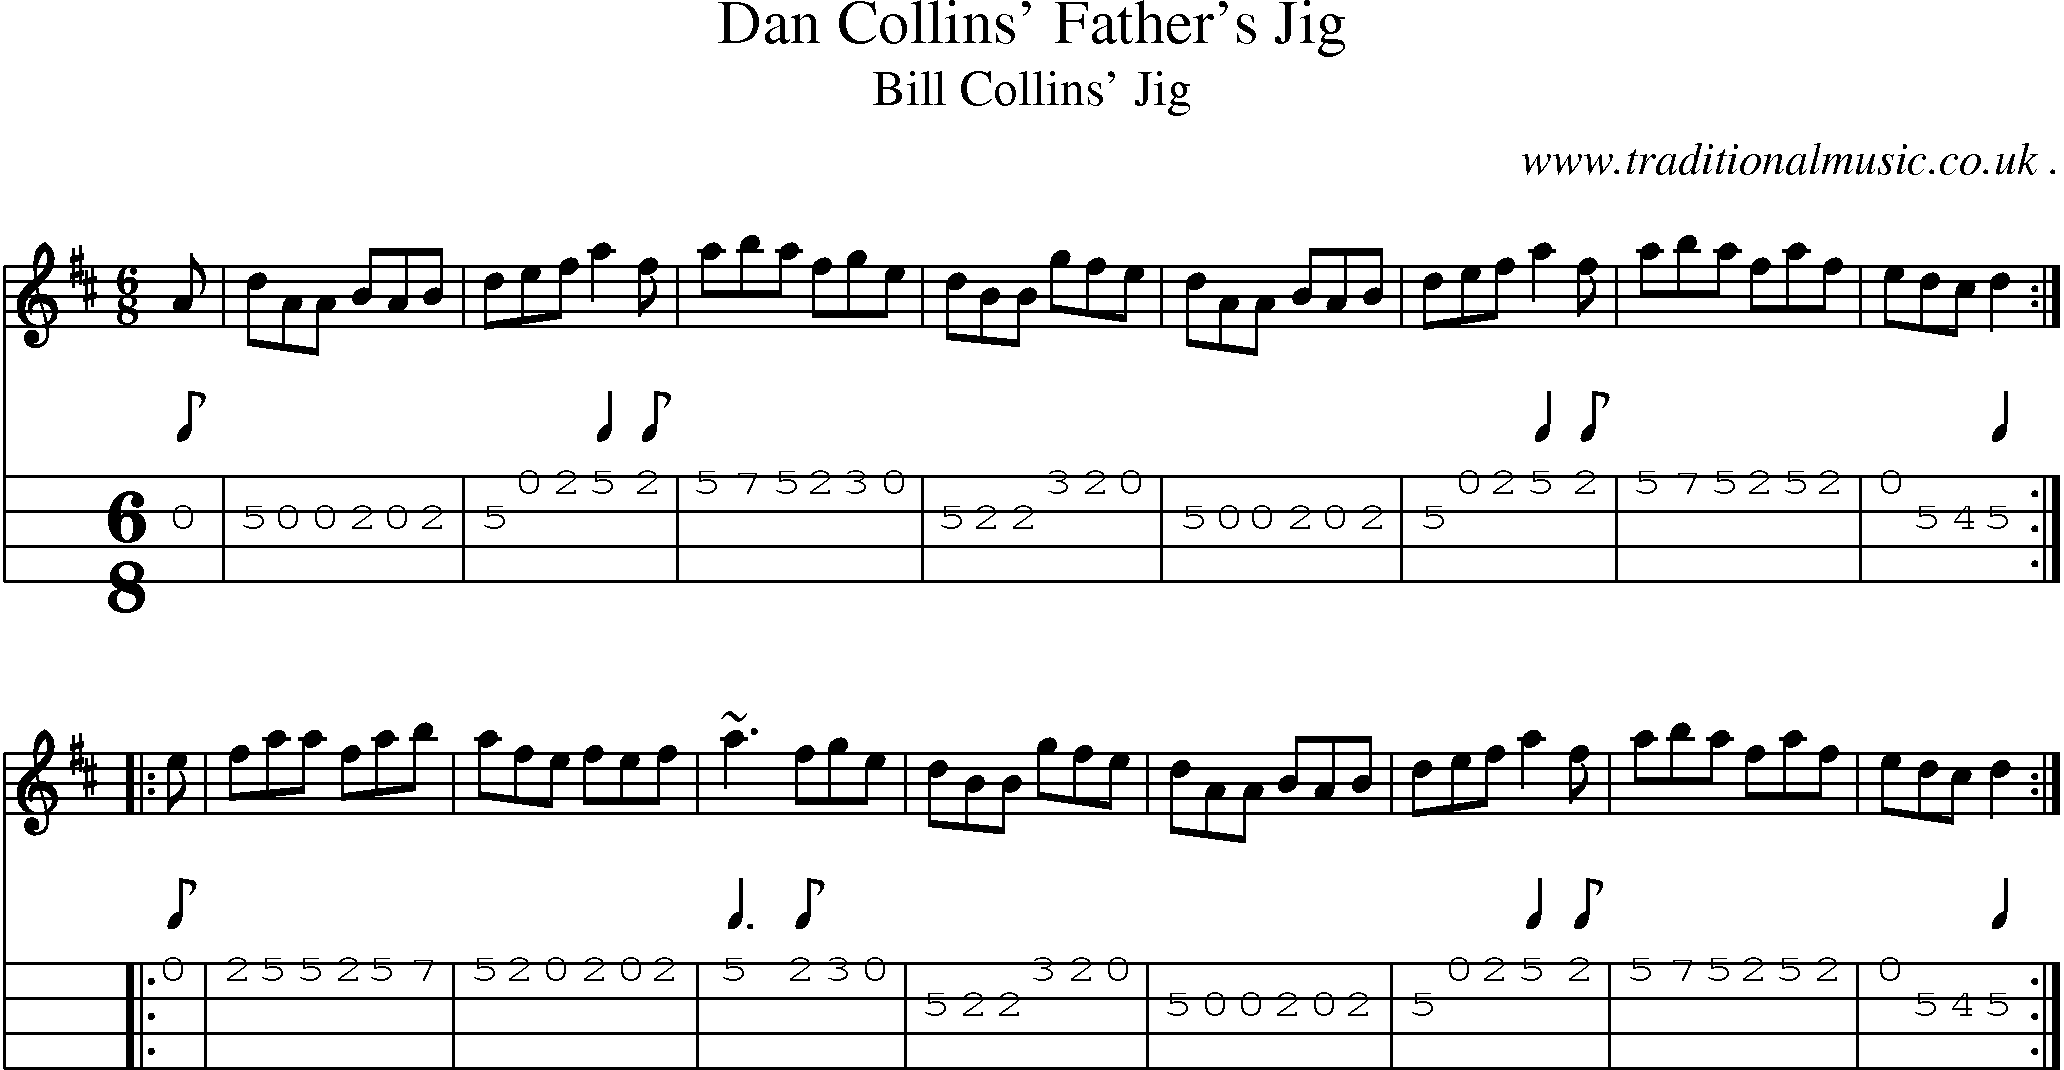 Sheet-music  score, Chords and Mandolin Tabs for Dan Collins Fathers Jig